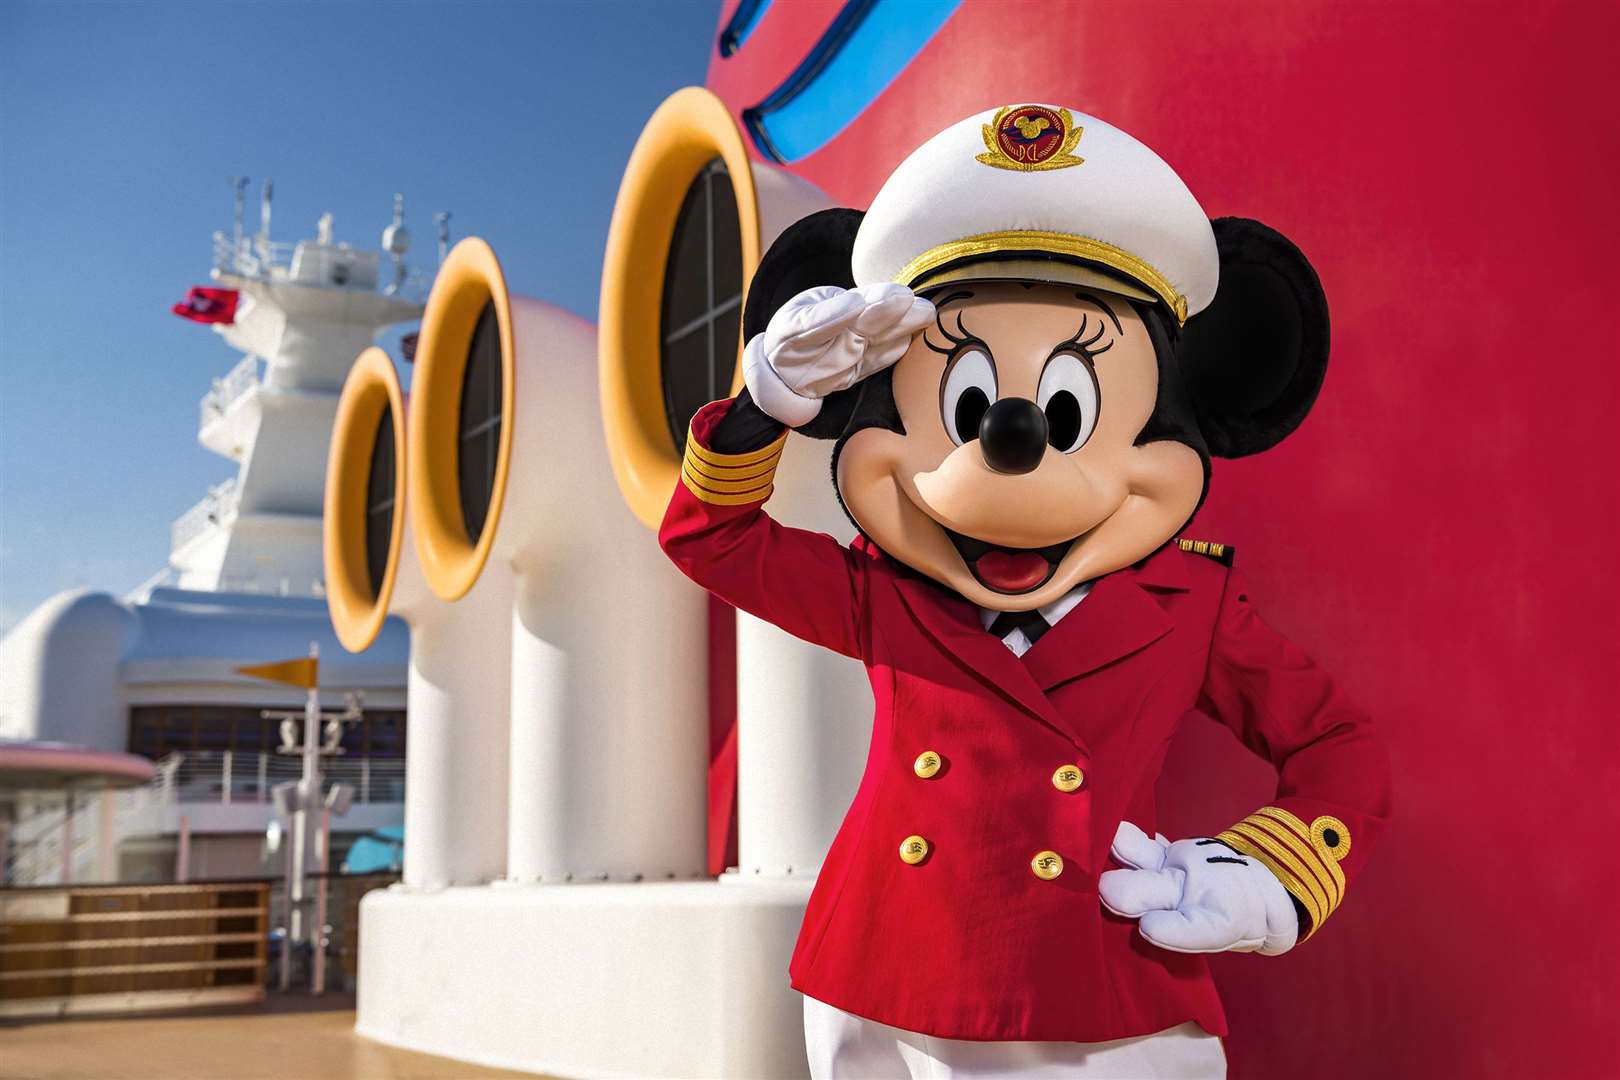 With foreign travel remaining uncertain, Disney Cruise Line is launching a summer of UK holidays which go on sale this Friday, April 30